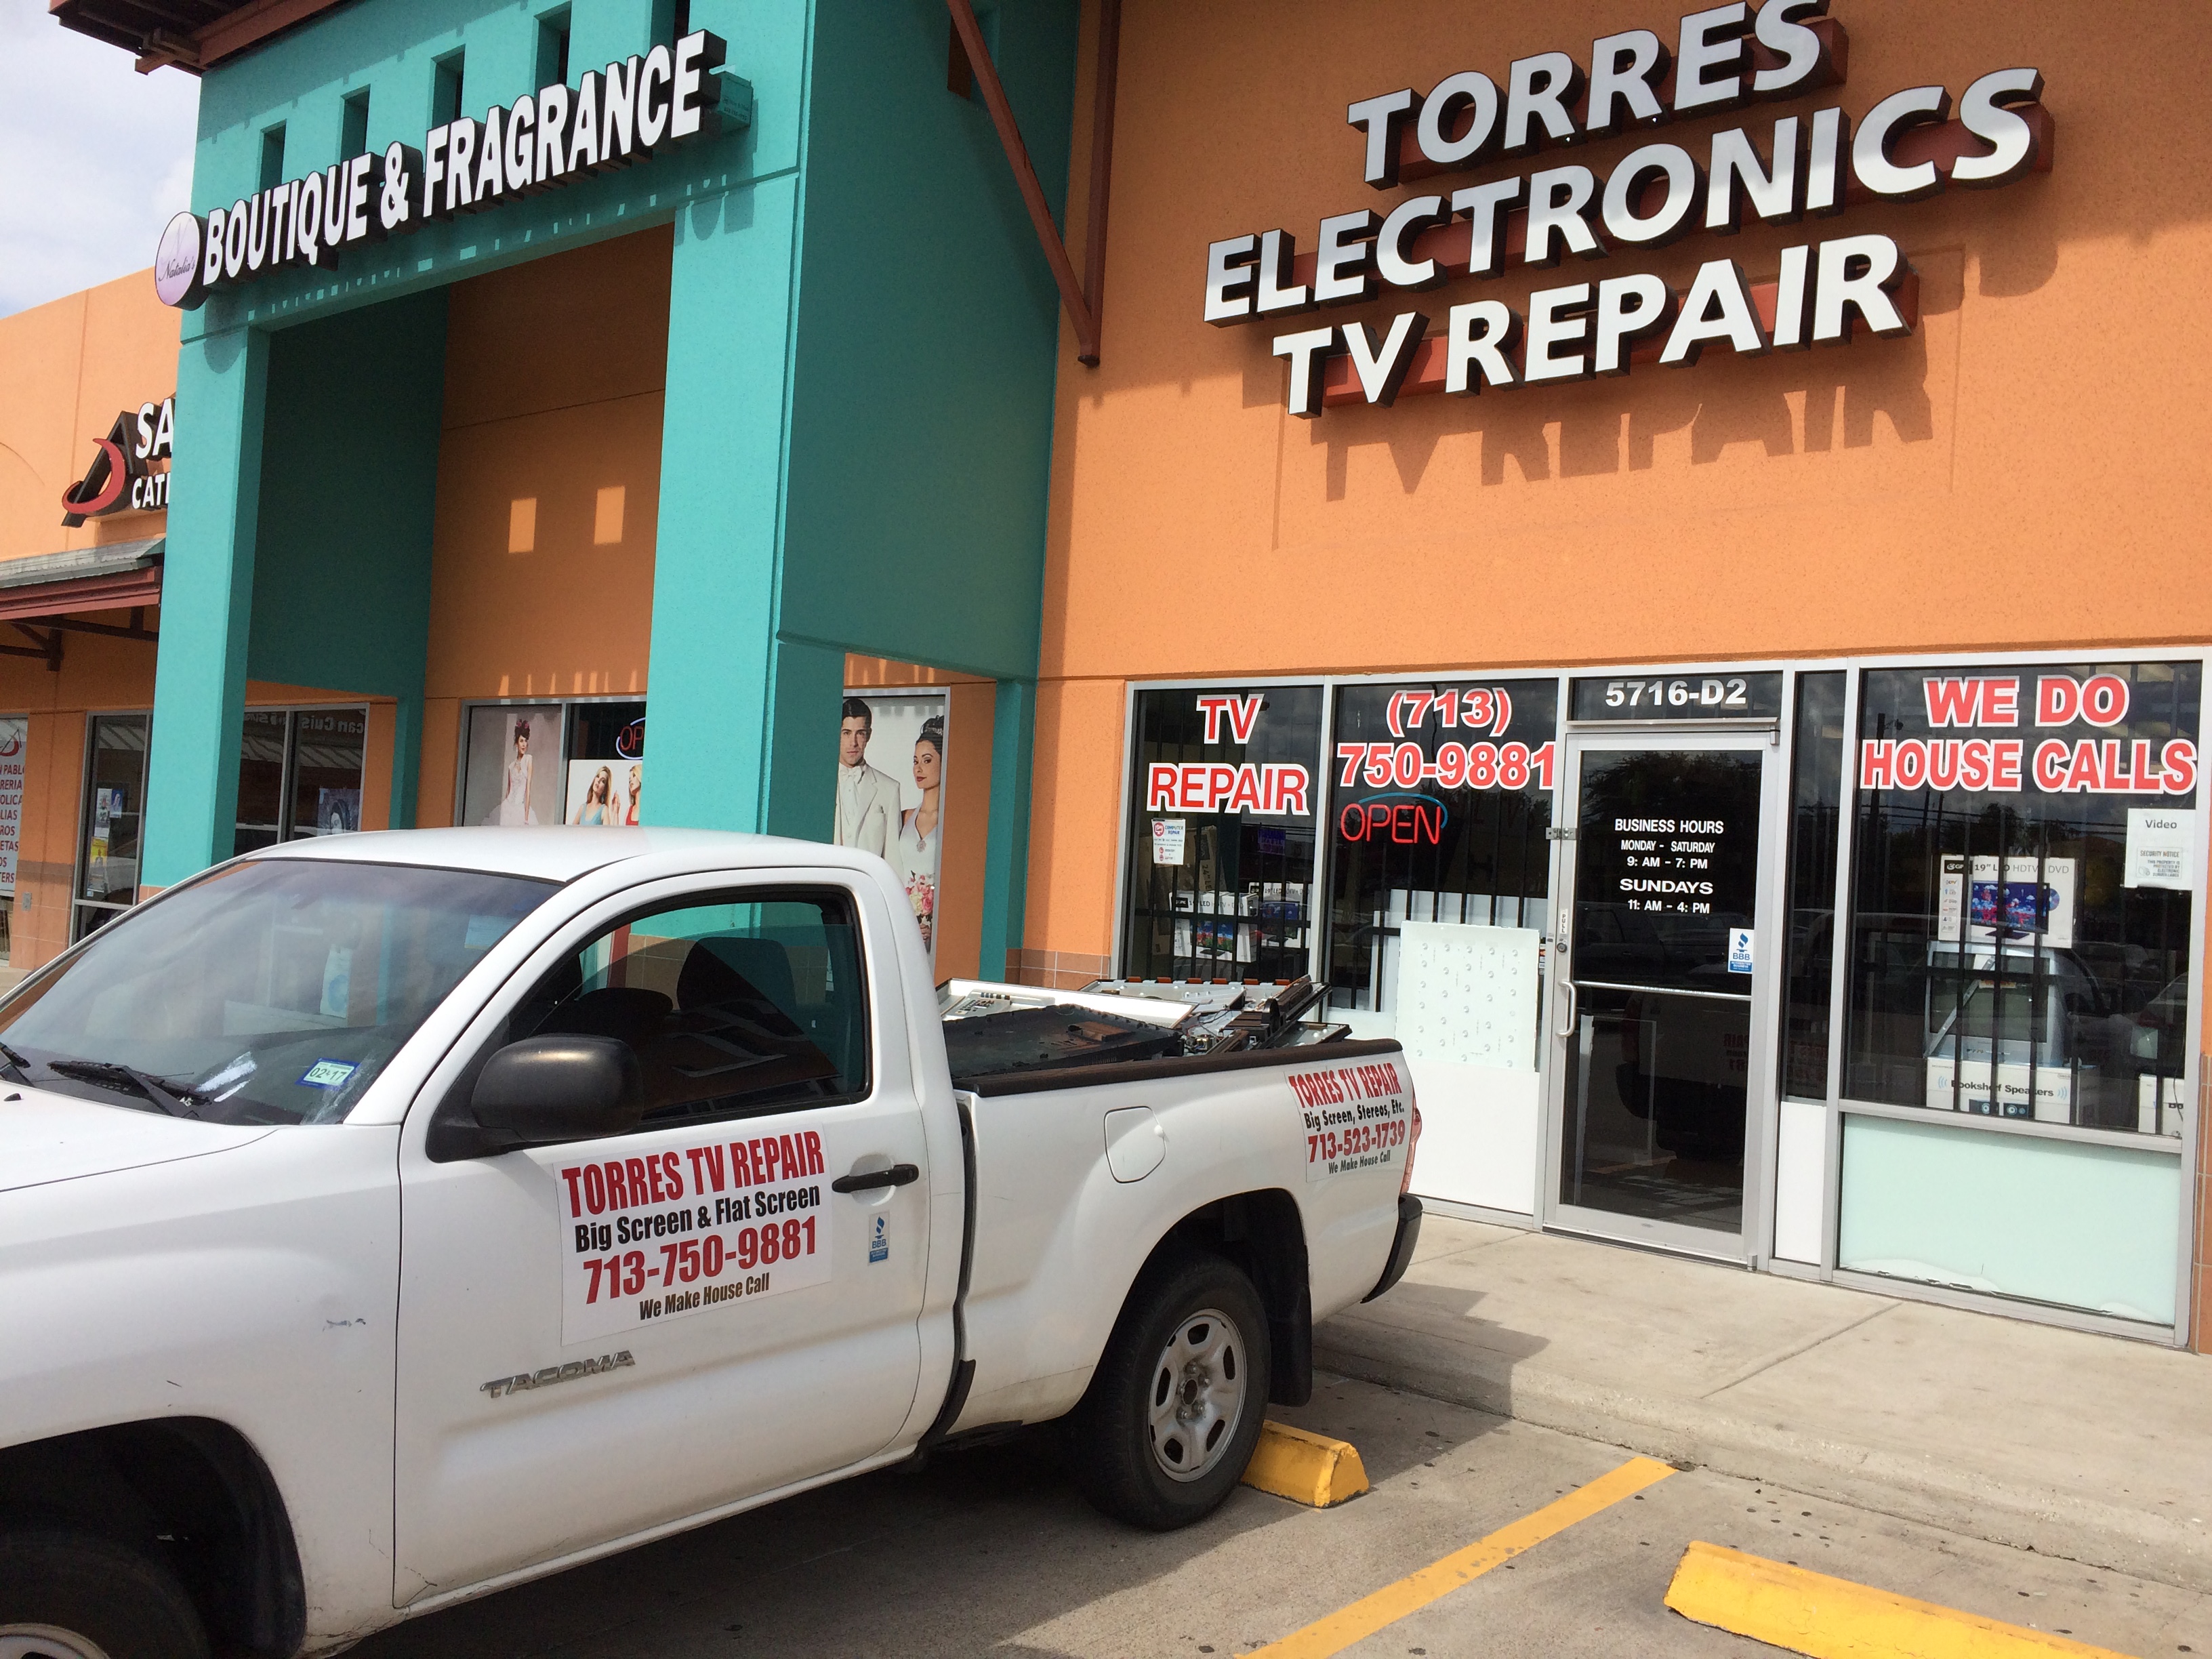 TORRES ELECTRONICS TV REPAIR AND PARTS Coupons near me in Houston, TX 77081 | 8coupons